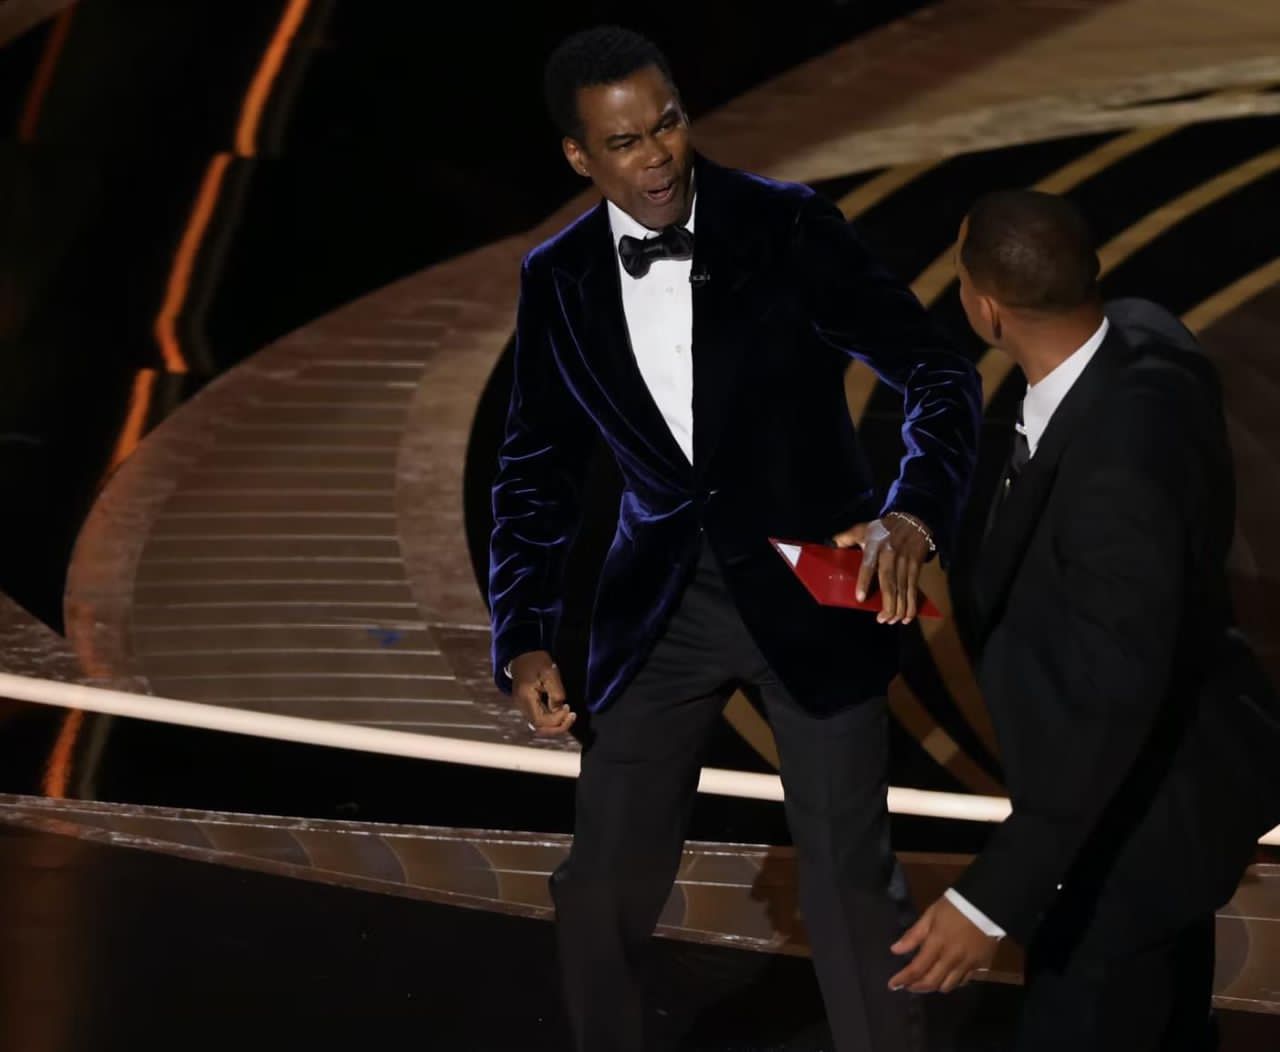 UPDATE: Comedian, Chris Rock Declined To File Police Report After Will Smith Slap At Oscars, Police Say